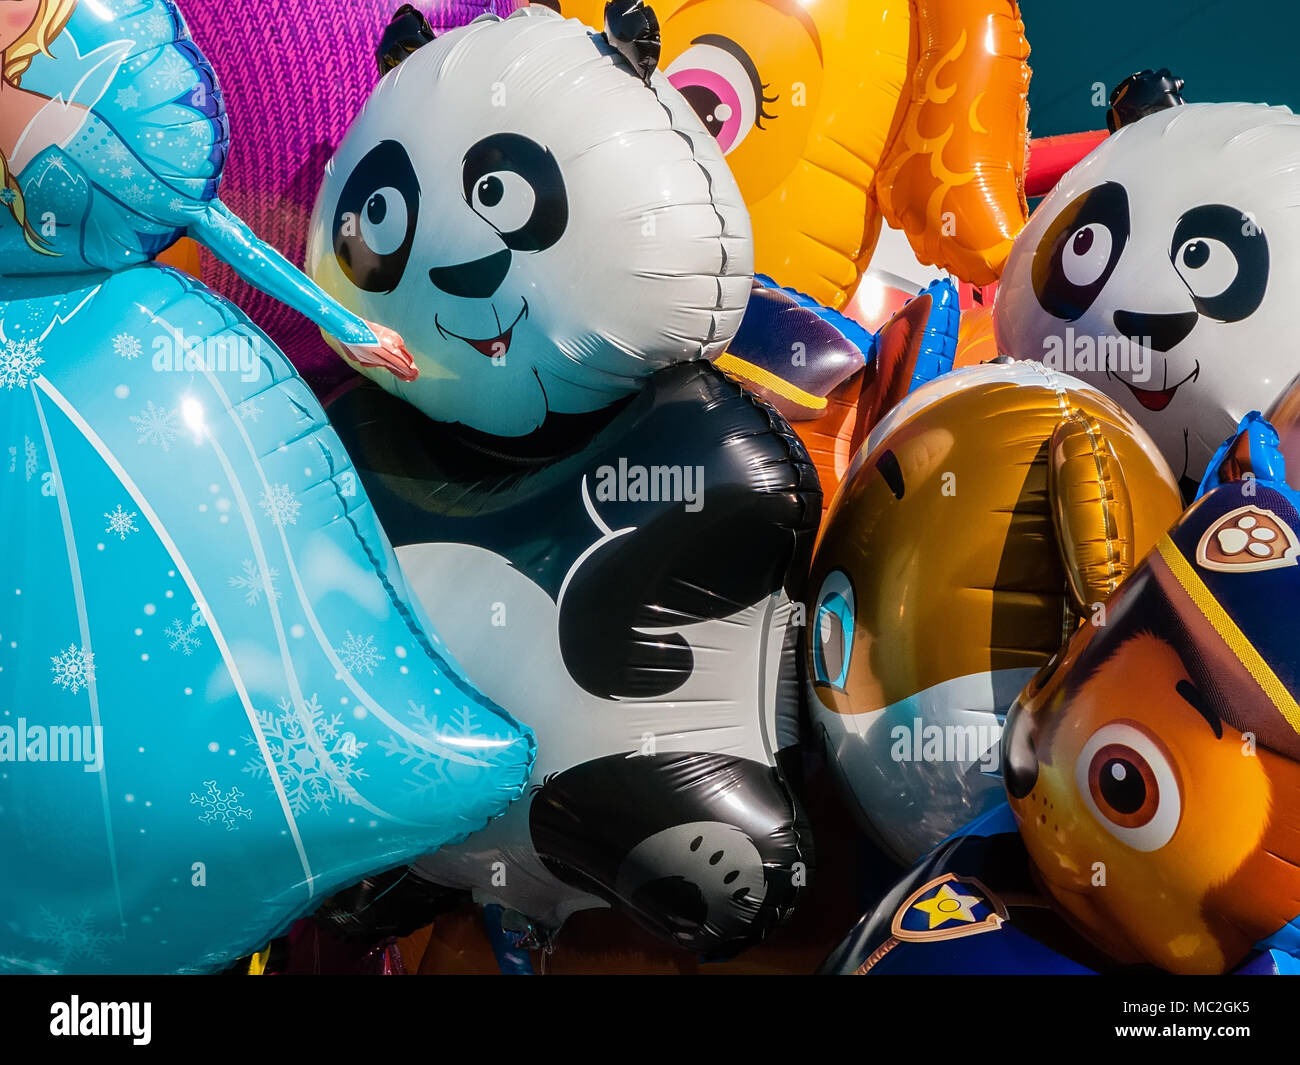 Guimaraes, Portugal. Balloons with the shape of cartoon characters on sale at concert of band for children Stock Photo